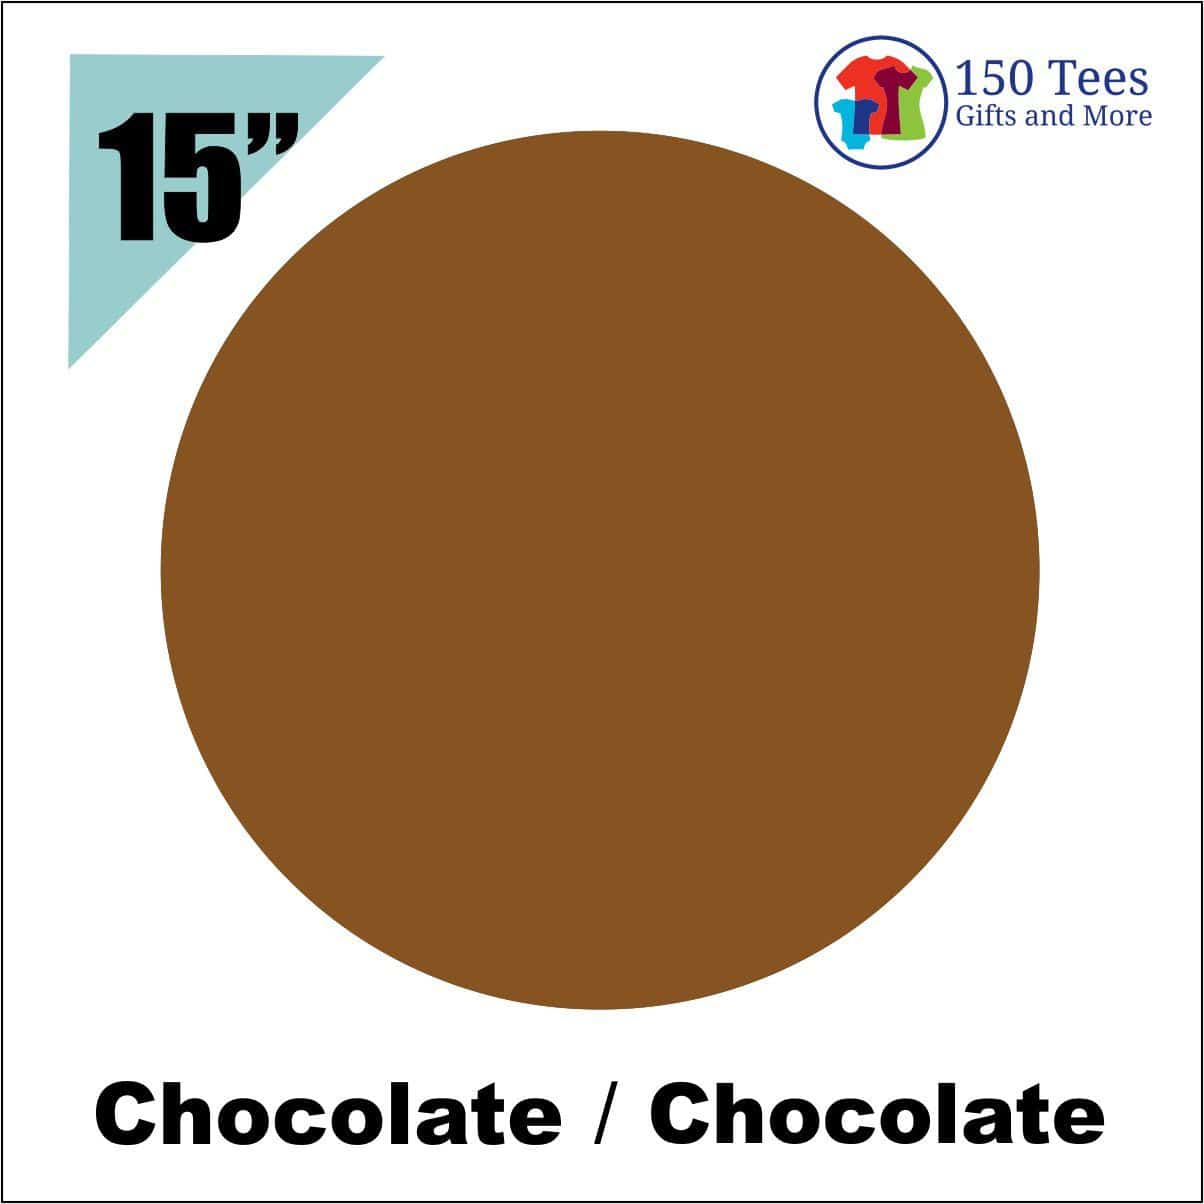 EasyWeed HTV 15" - Chocolate - 150 TEES GIFTS & MORE